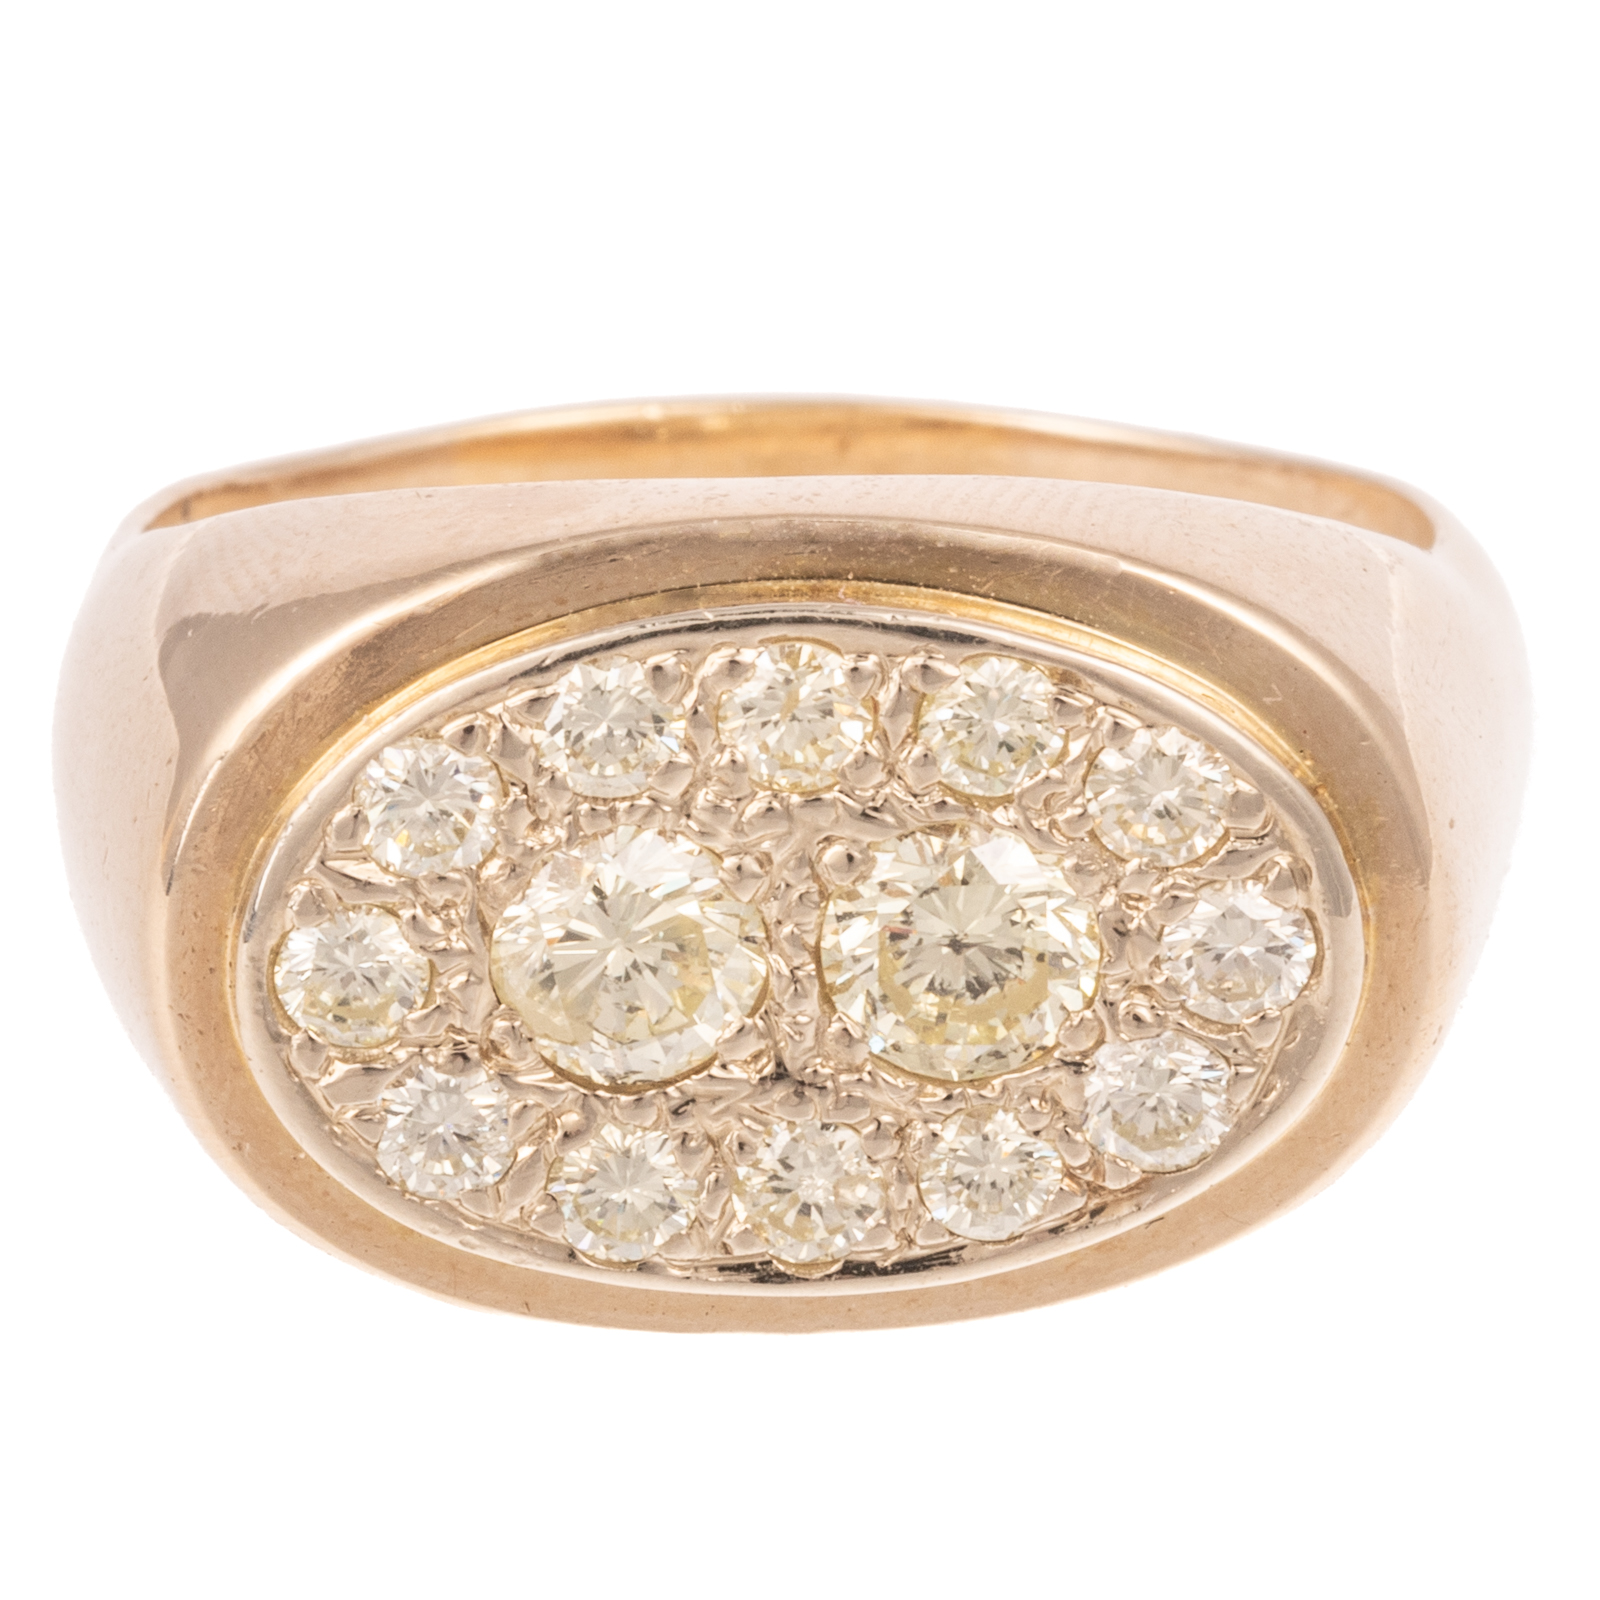 AN OVAL PAVE DIAMOND RING IN 14K